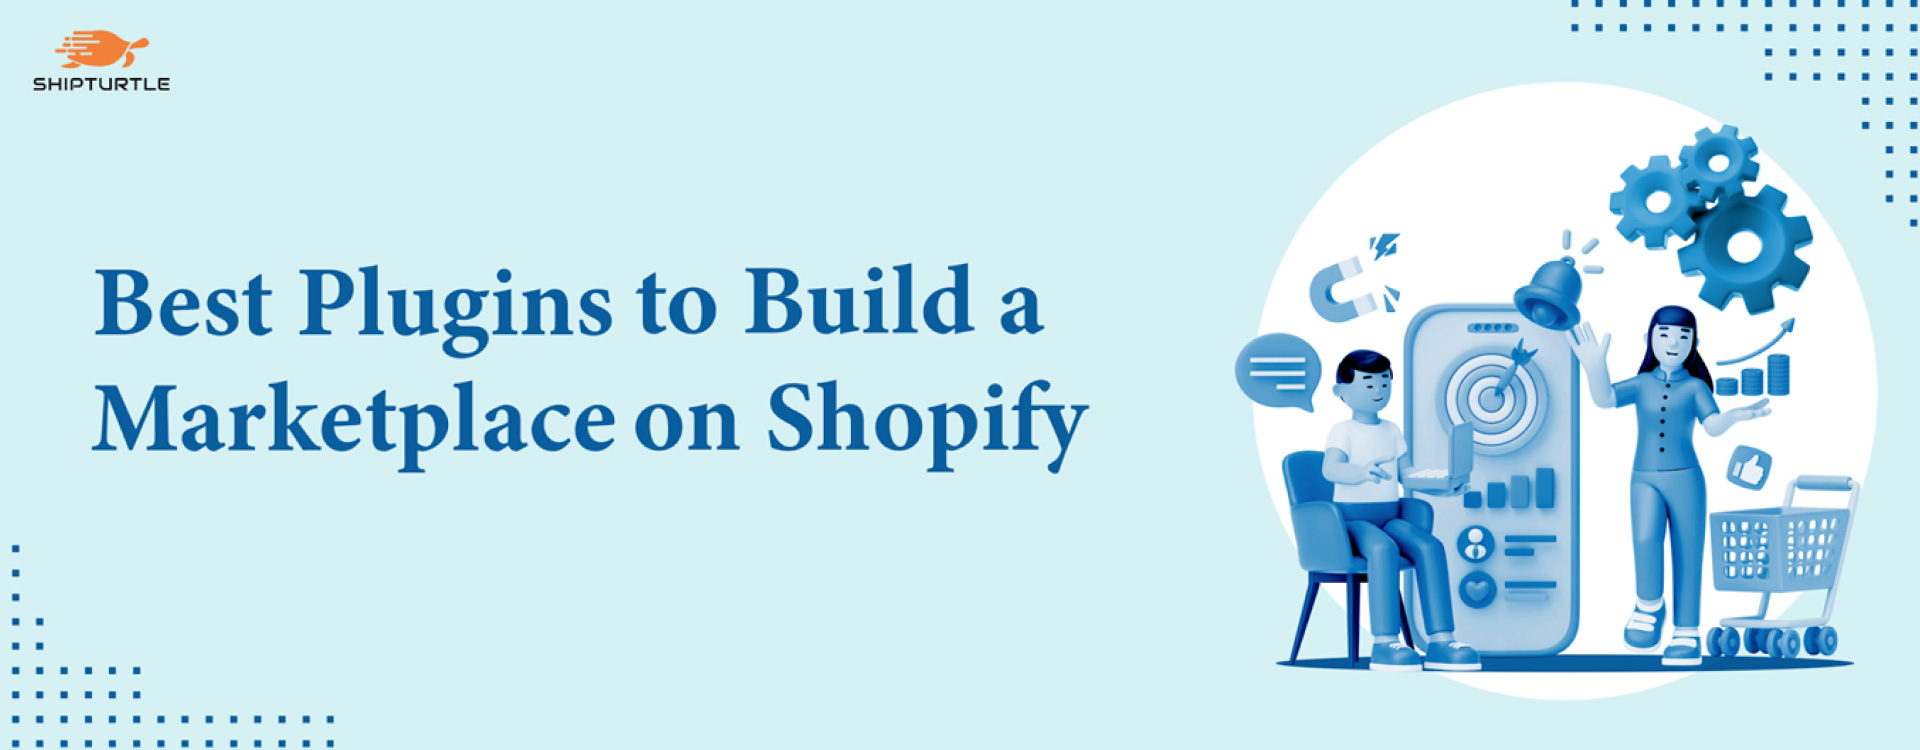 Top Shopify Plugins To Build A B2C Marketplace 